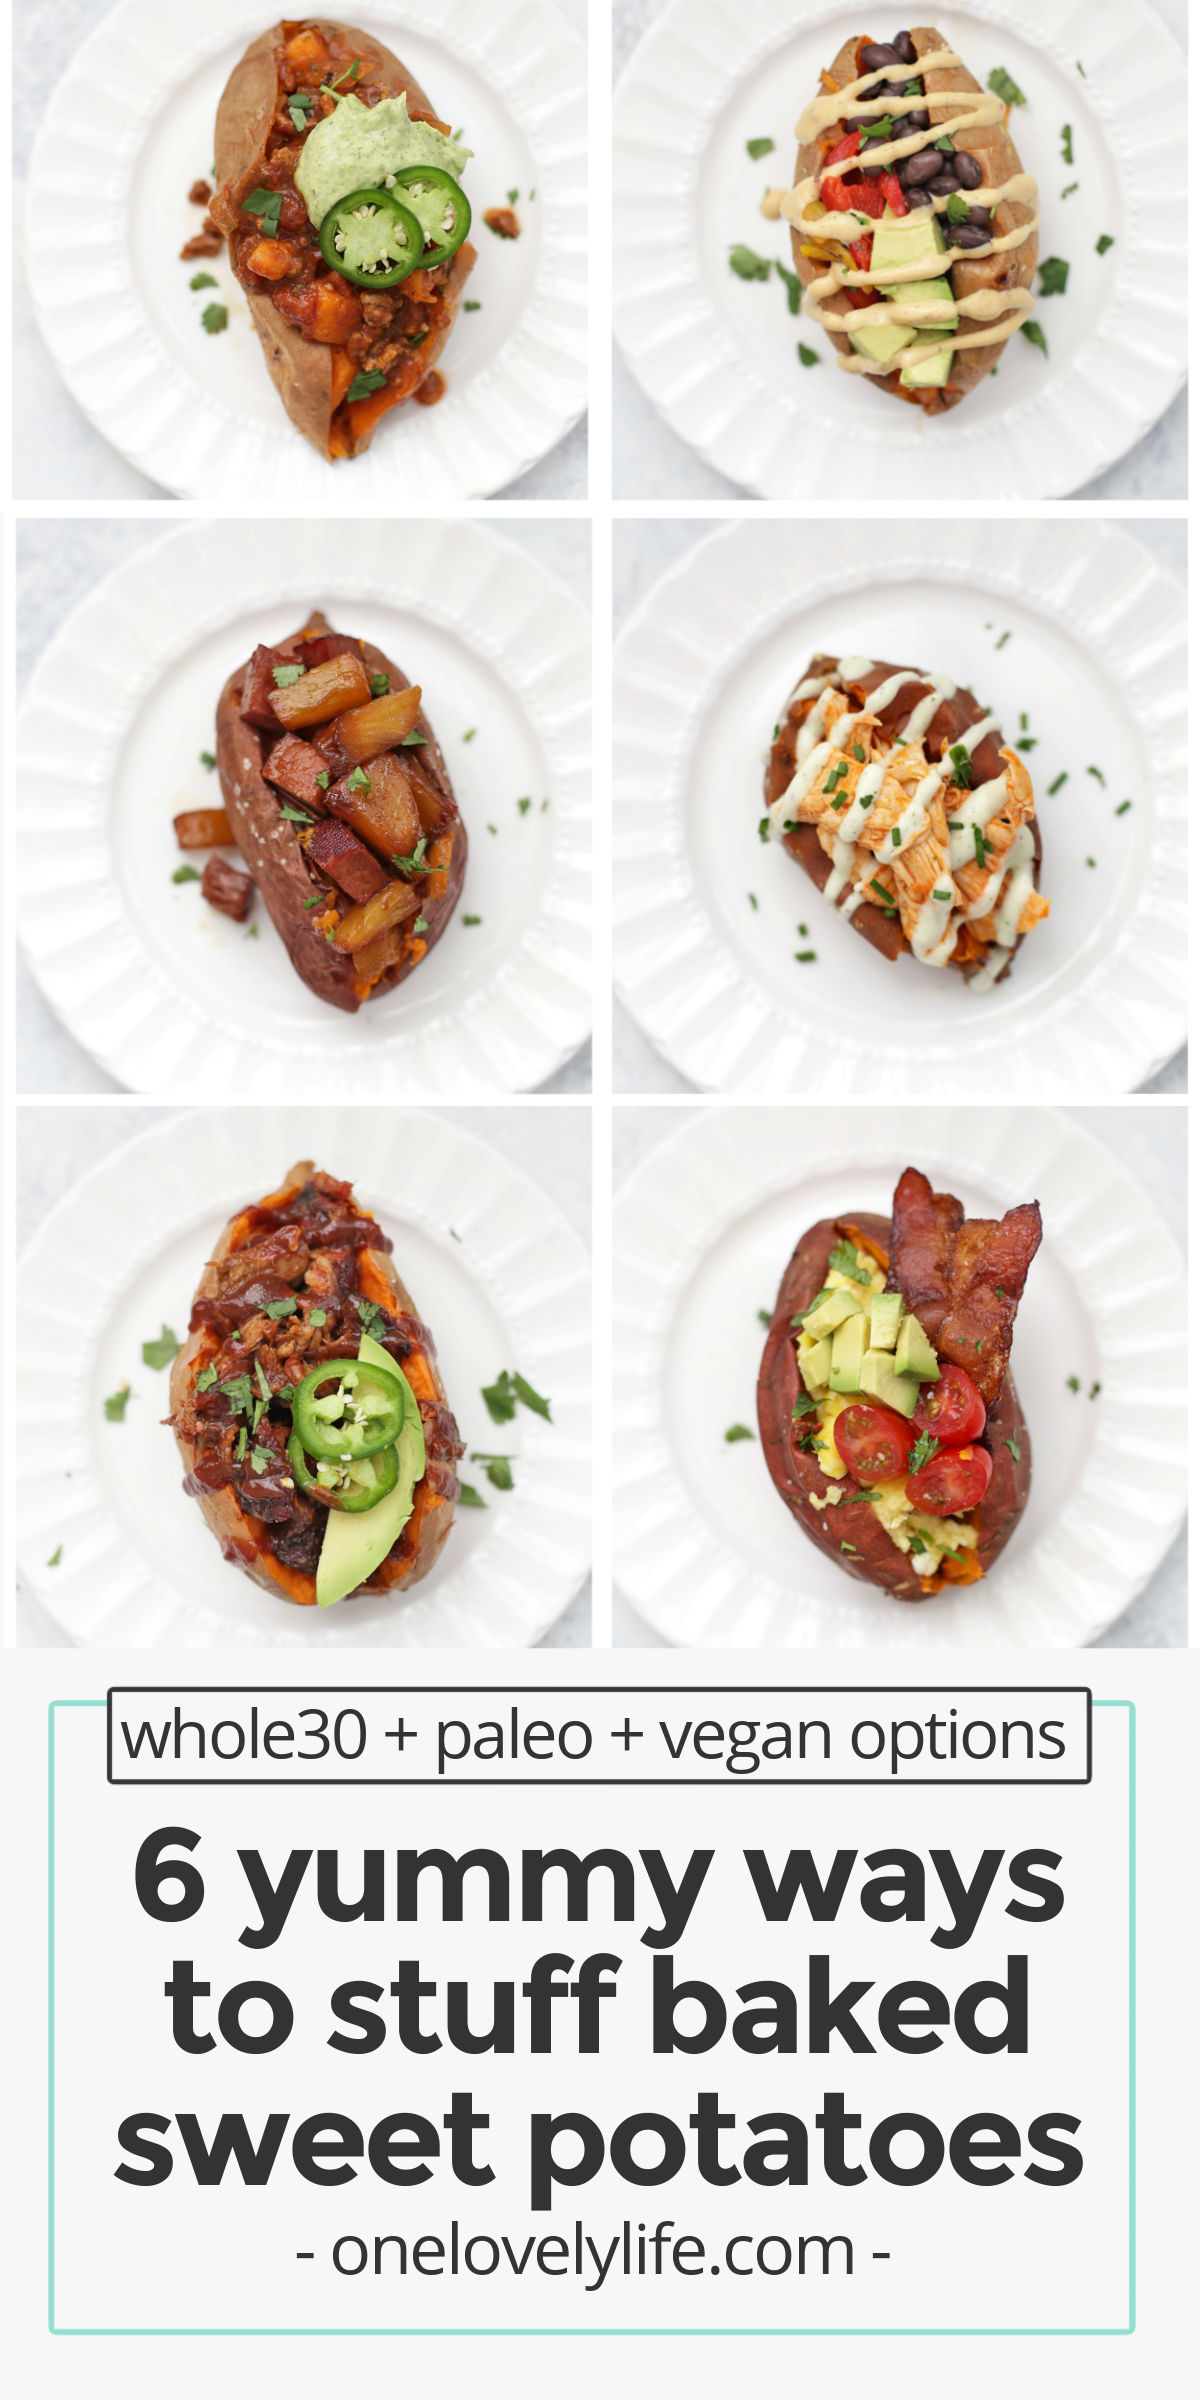 6 Amazing Ways to Stuff a Baked Sweet Potato - My fail-proof method for baking a perfect sweet potato and SO MANY ideas for how to stuff them! / stuffed sweet potatoes / stuffed baked sweet potatoes / paleo stuffed sweet potatoes / vegan stuffed sweet potatoes / baked sweet potatoes / healthy dinner / paleo dinner / whole30 dinner / stuffed baked potatoes / mexican stuffed sweet potatoes / hawaiian stuffed sweet potatoes / bbq stuffed sweet potatoes / buffalo stuffed sweet potatoes